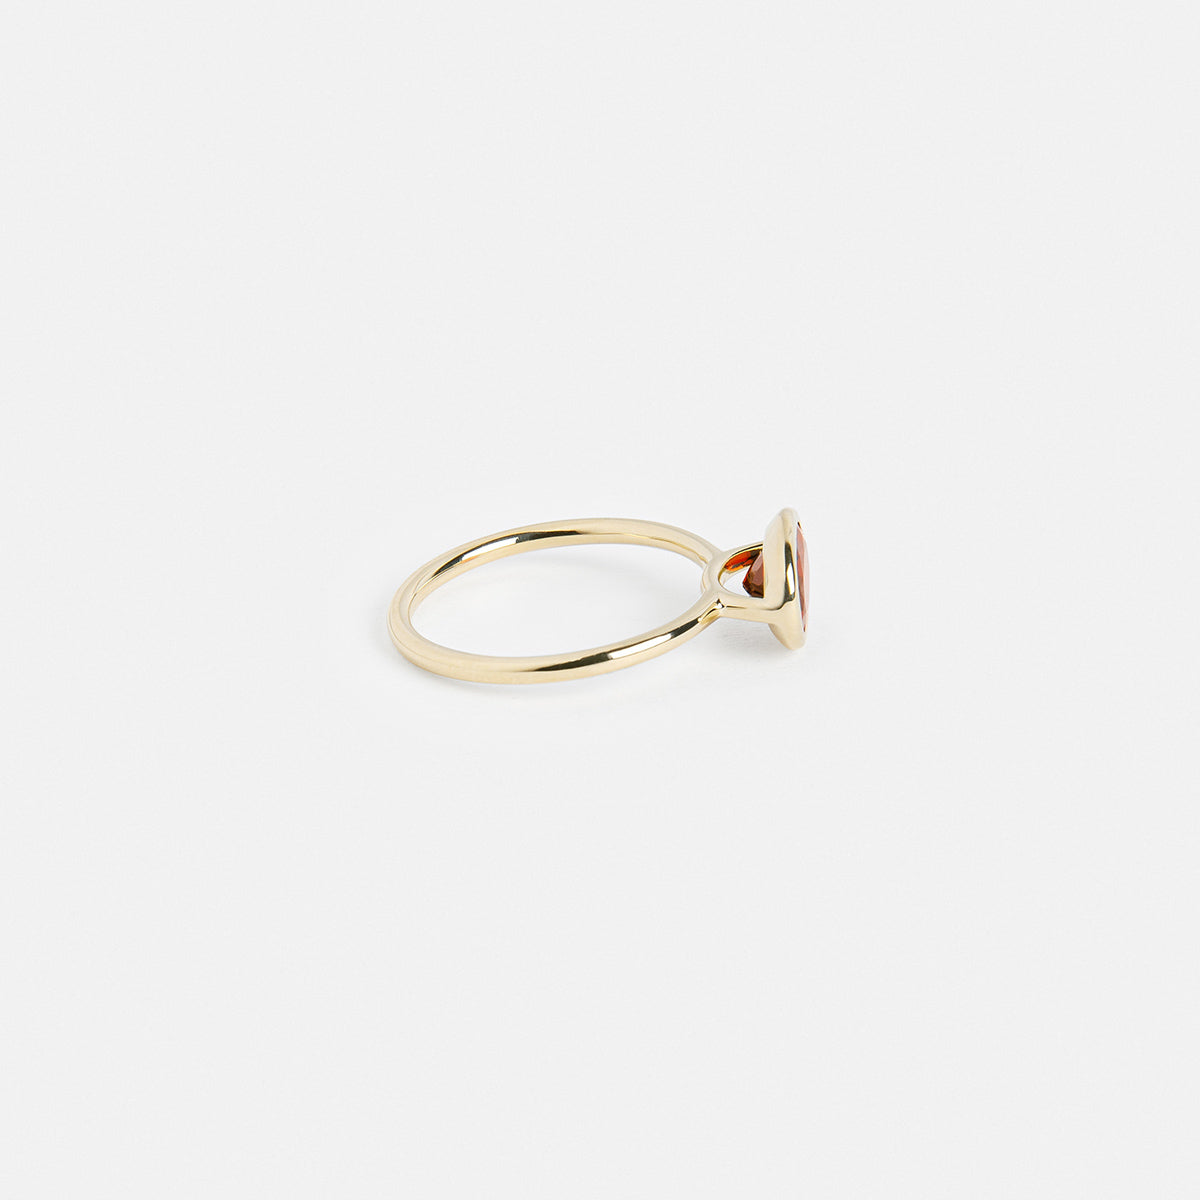 Lida Unique Ring in 14k Gold set with an oval cut garnet By SHW Fine Jewelry NYC